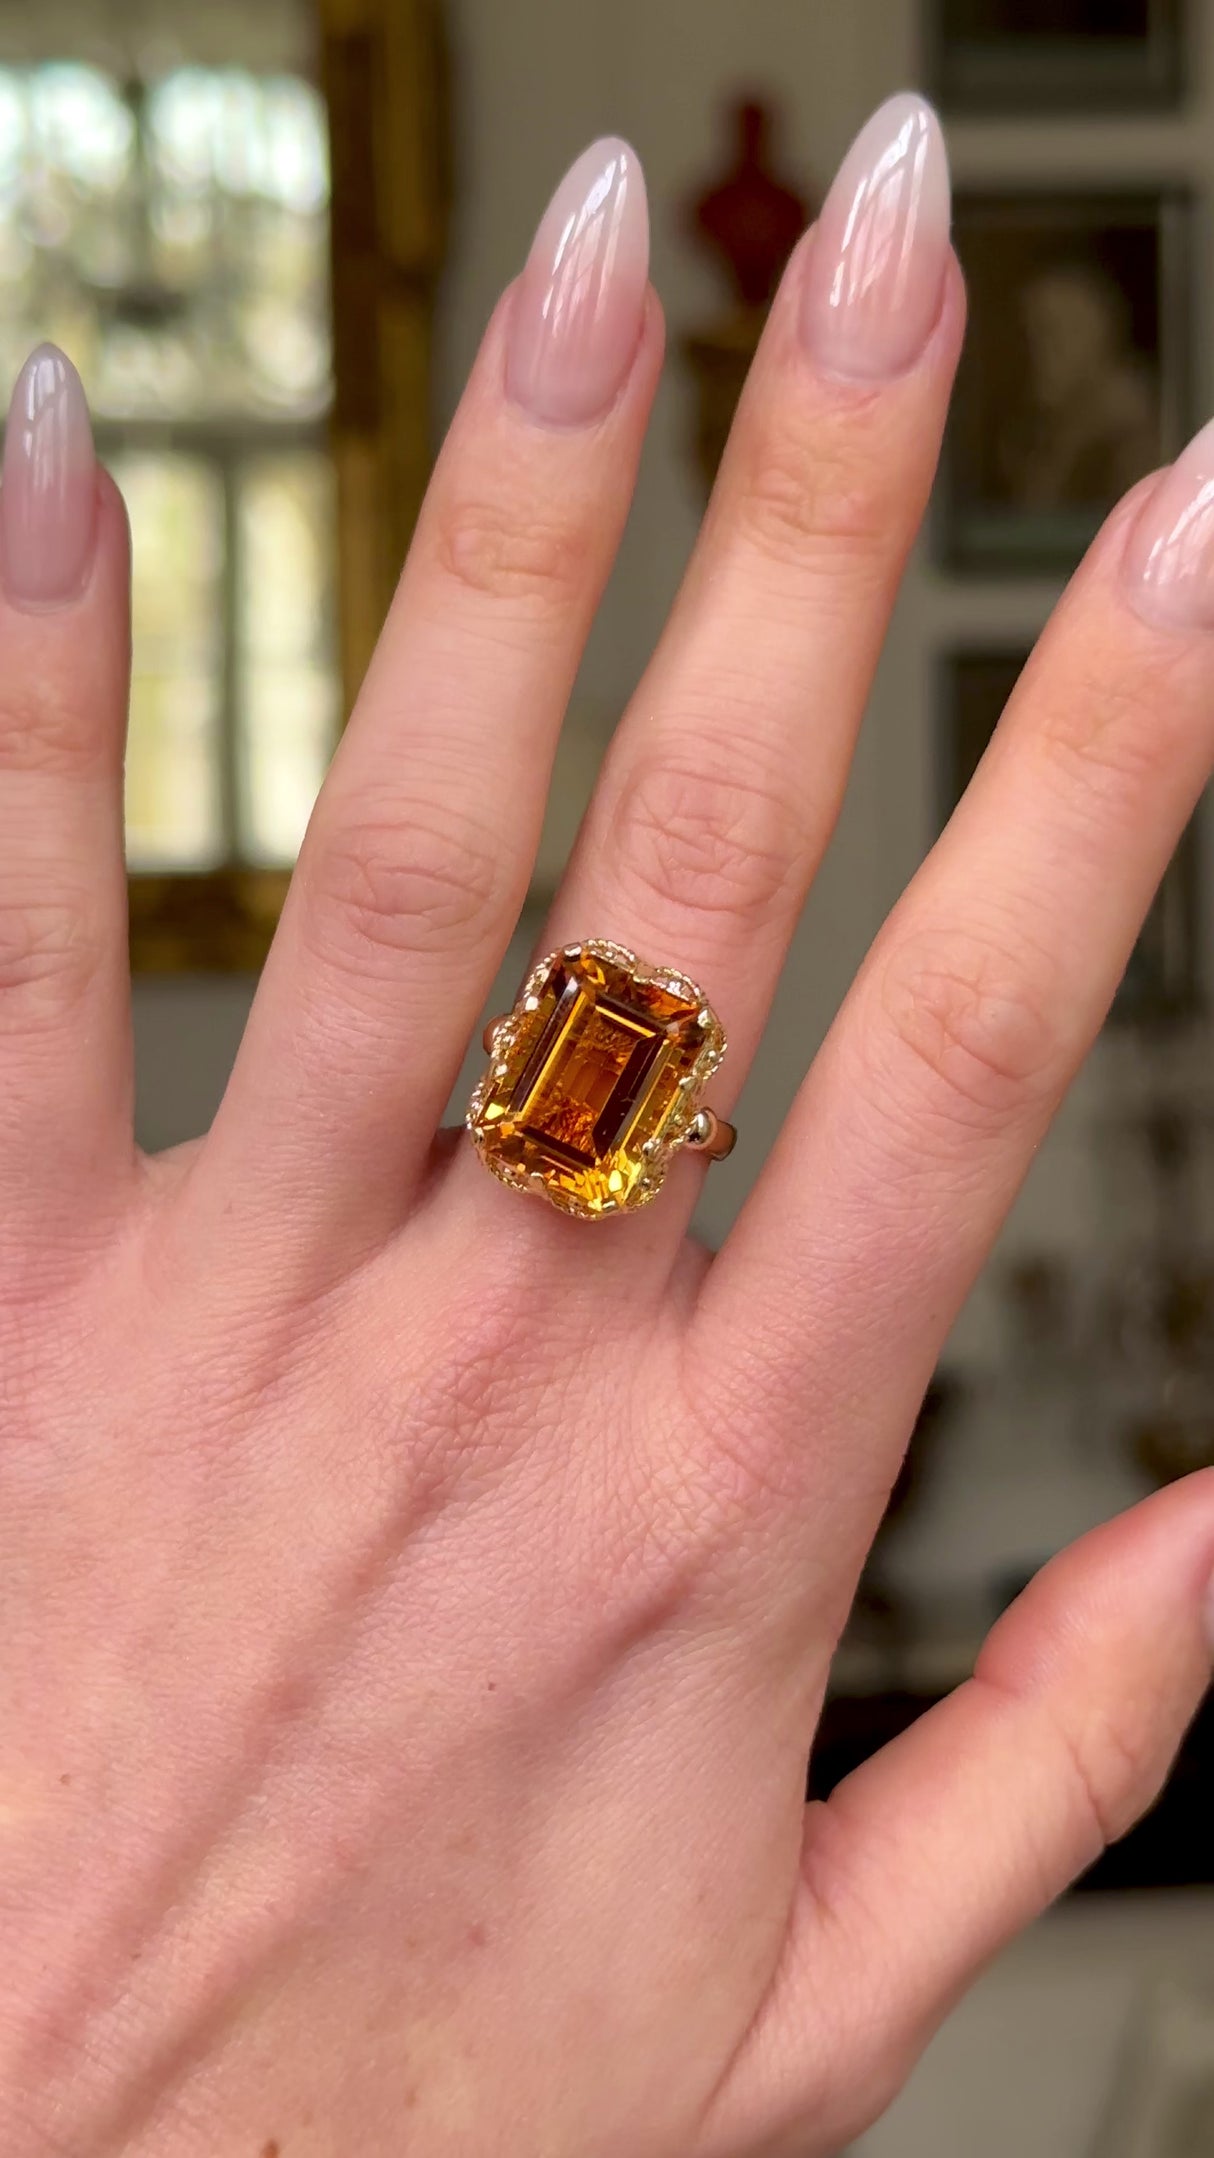 Antique, 1880s Citrine Ring with Rope Metal Work, worn on hand and rotated to give perspective.